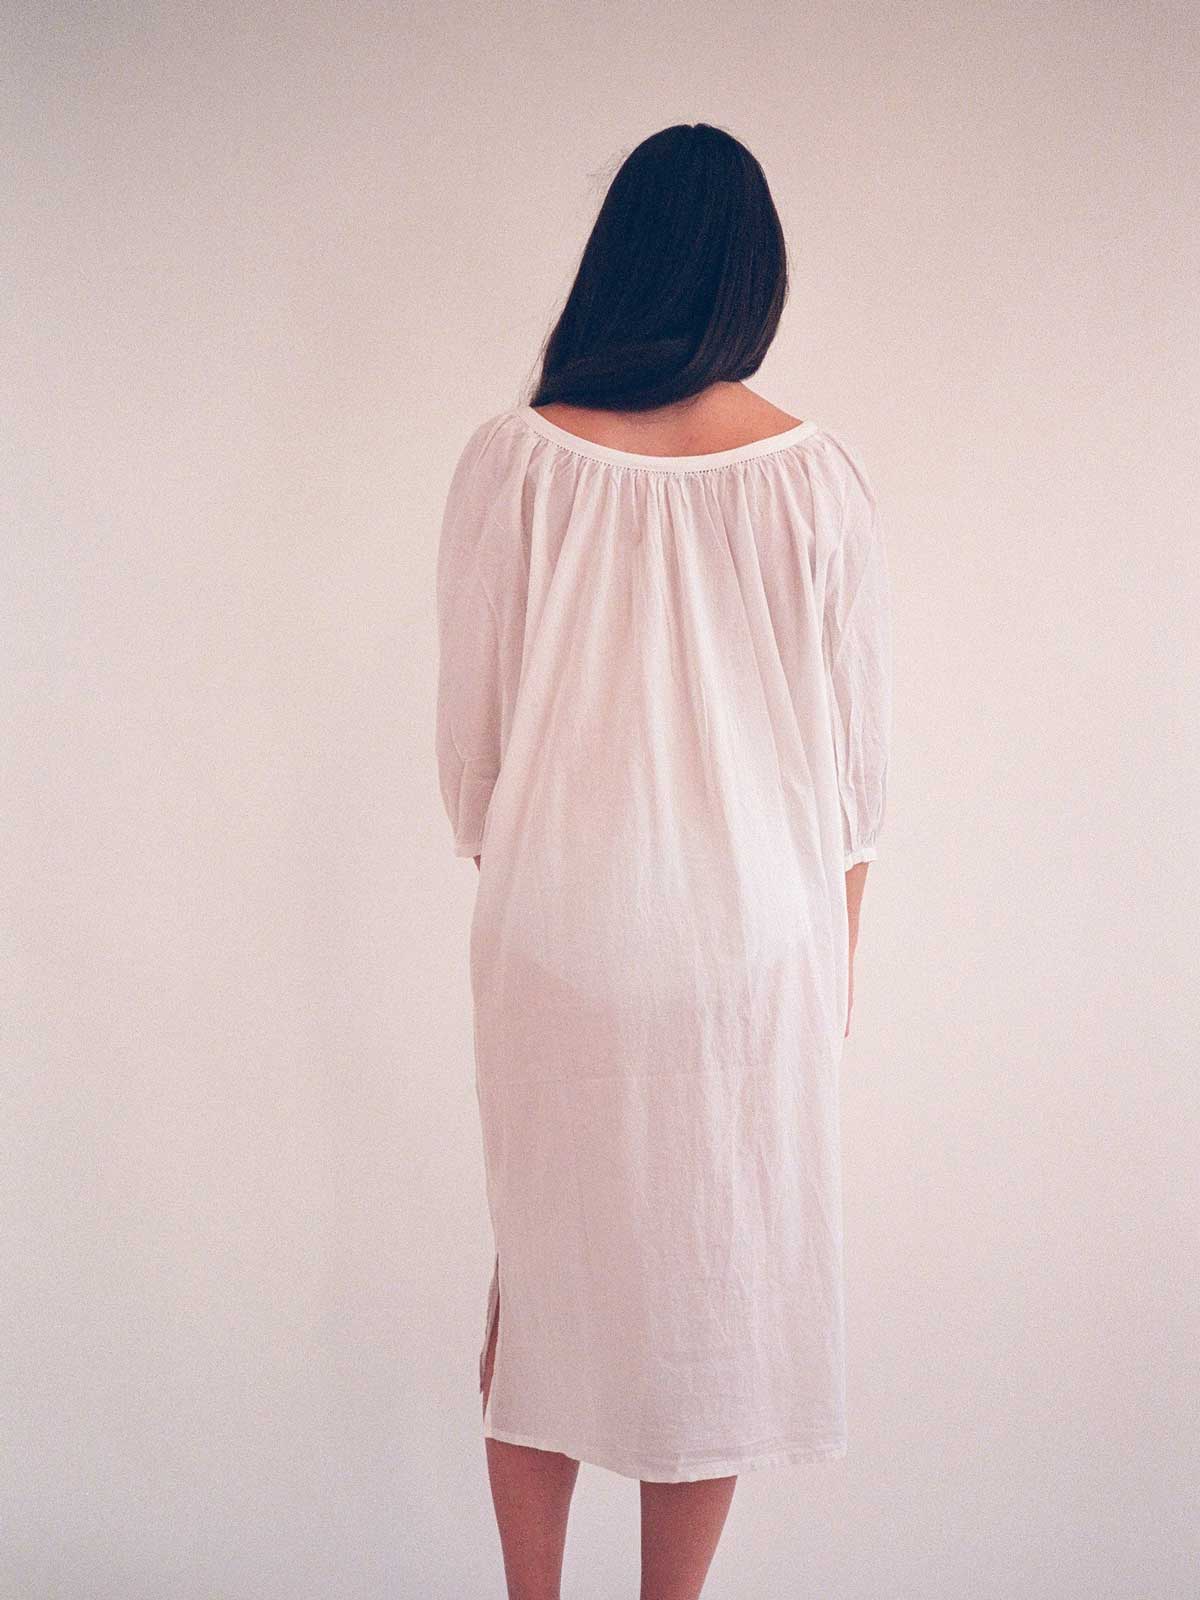 Night Gown in White by Domi woman's back